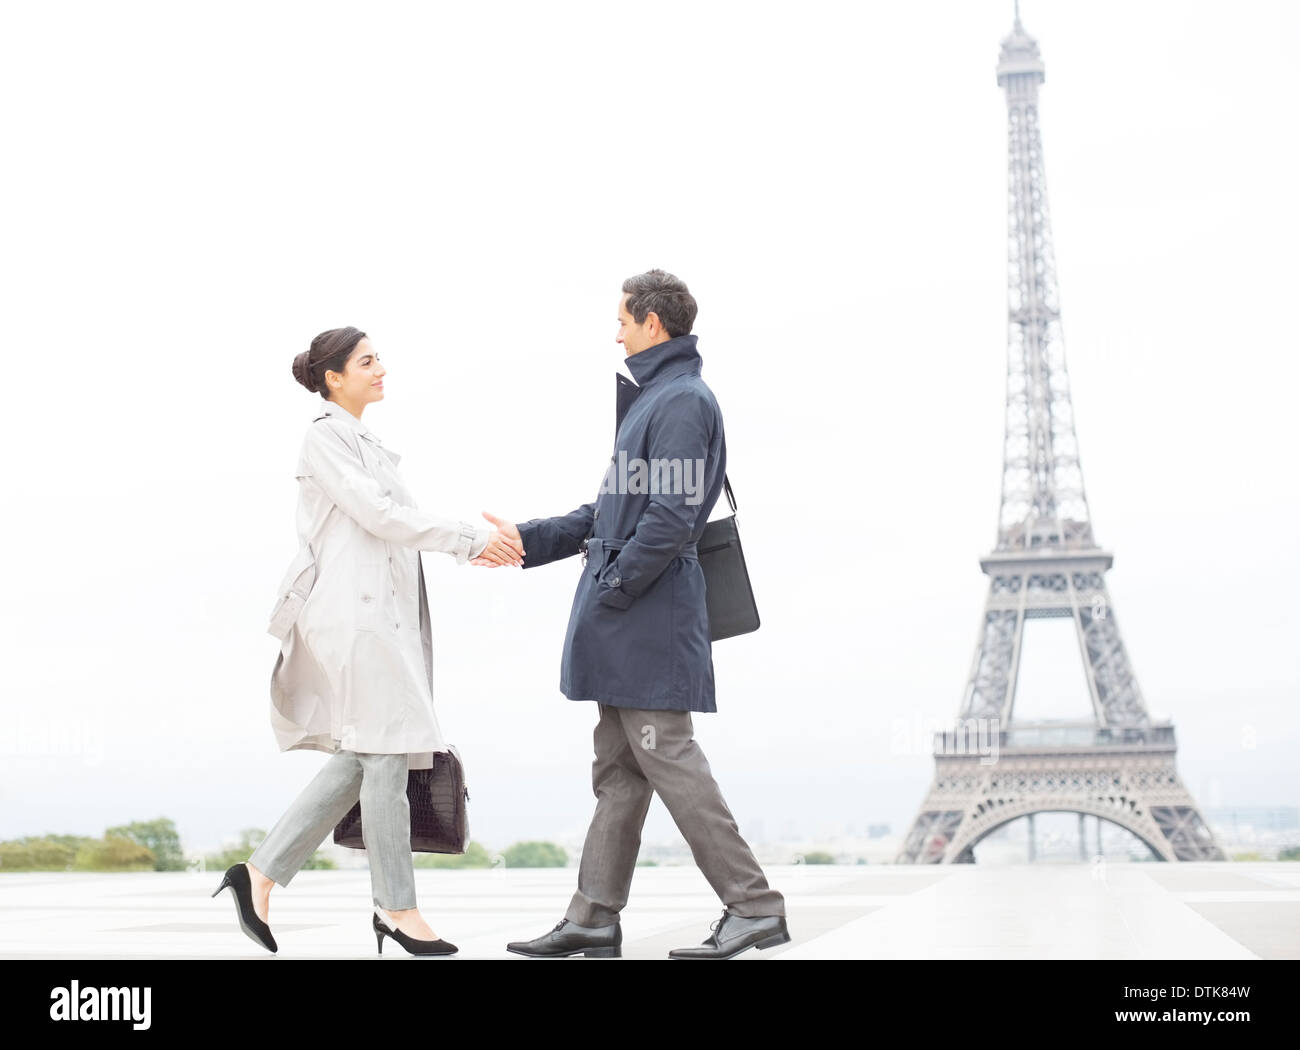 Business people shaking hands near Eiffel Tower, Paris, France Stock Photo